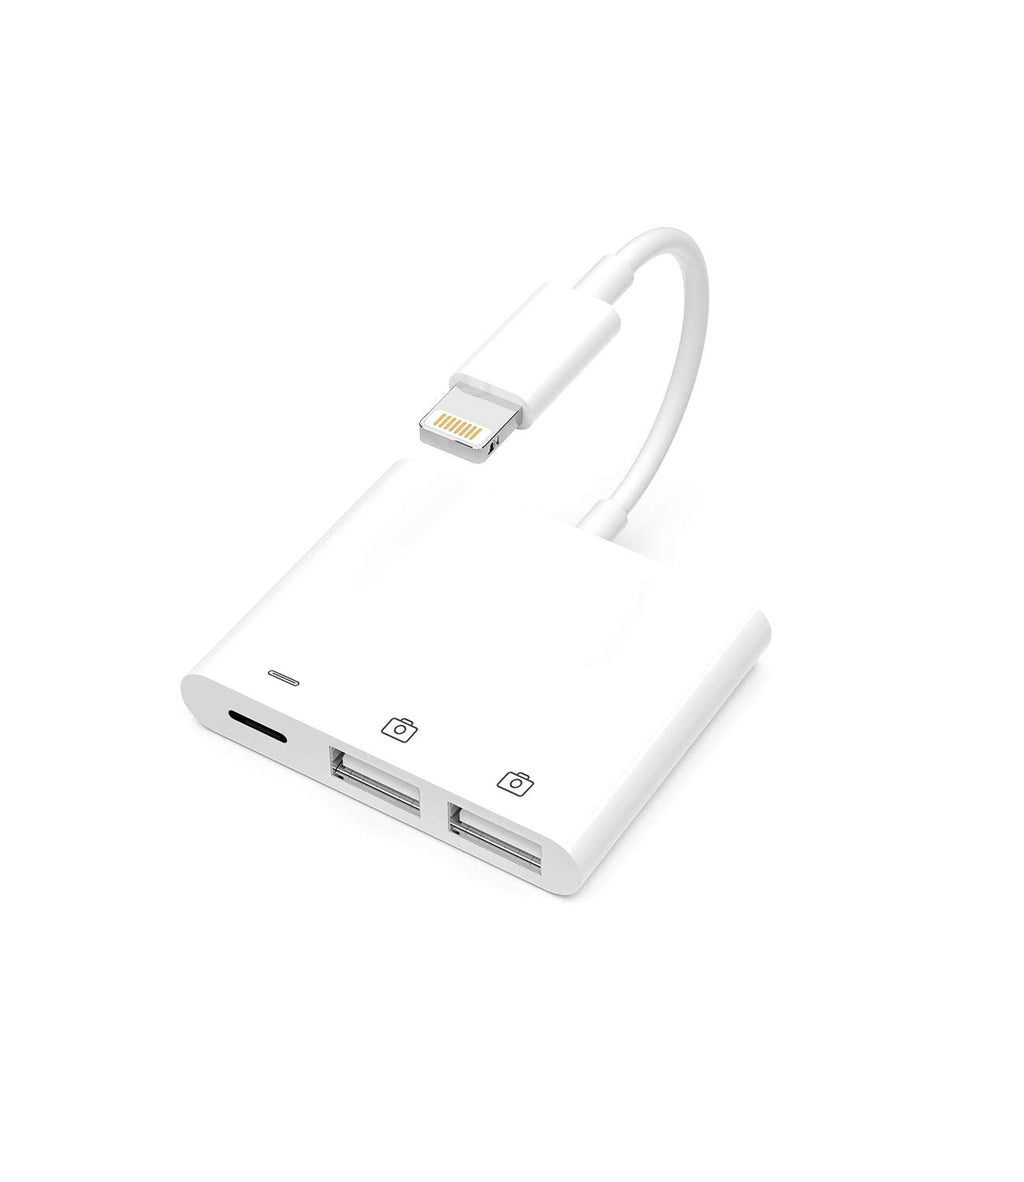  [AUSTRALIA] - Apple Certified Lightning Male to USB Female Adapter OTG and Charger Cable for iPhone 11 12 Mini max pro xs xr x se 7 8plus Ipad air A Camera Memory Stick Flash Drive Cord Converter Charging Splitter